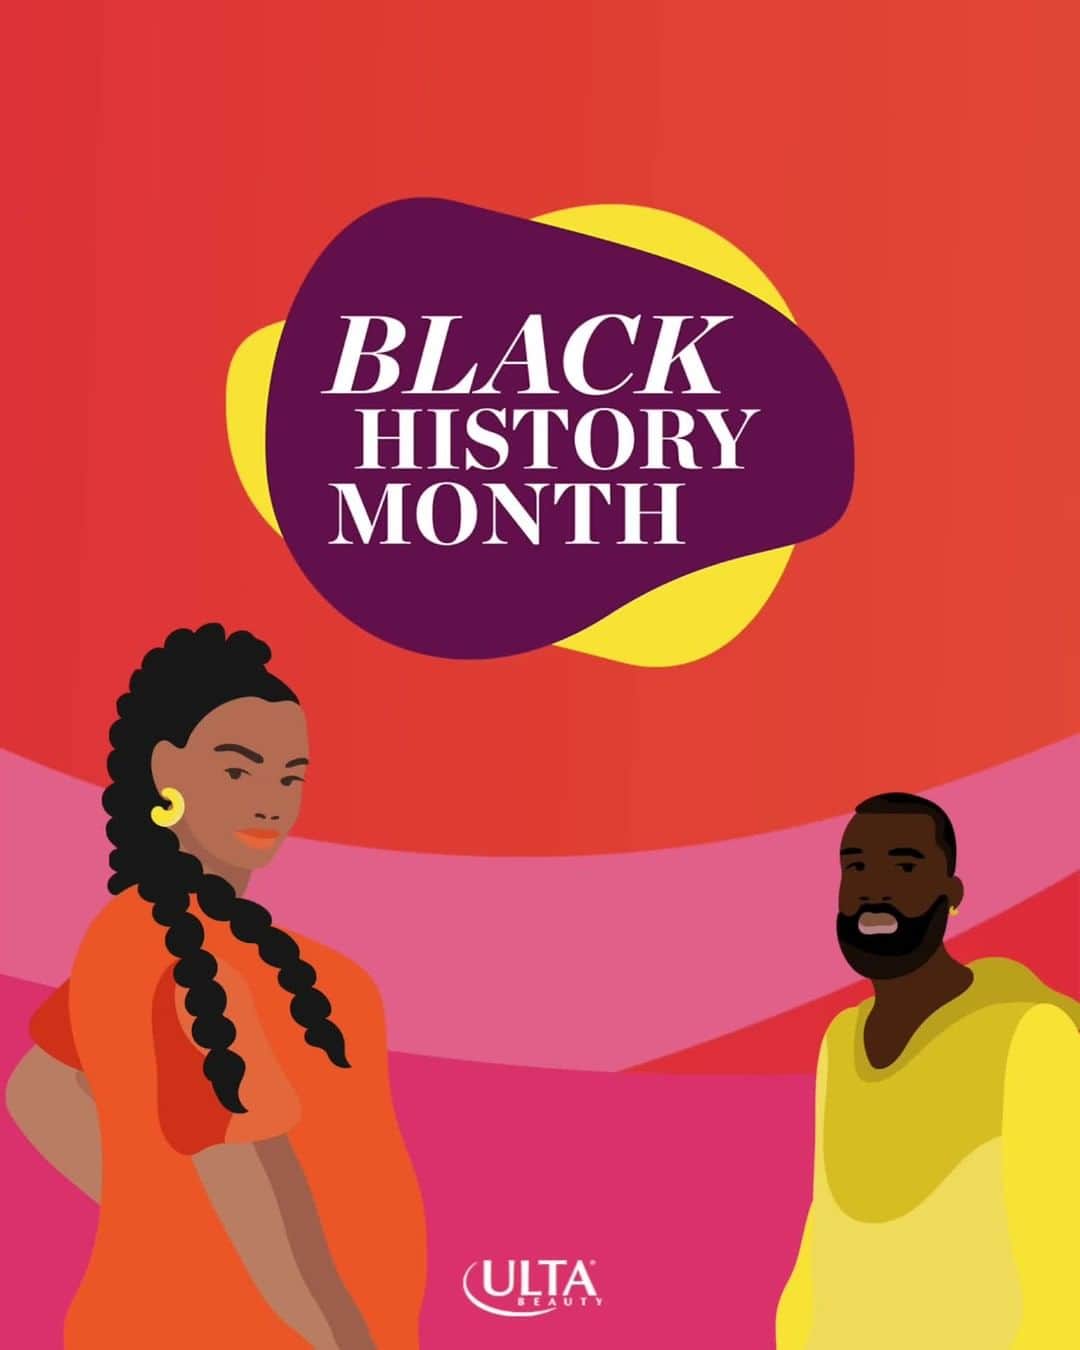 ULTA Beautyのインスタグラム：「In honor of Black History Month, we asked our associates to share how they see Black excellence in their everyday lives. Here's what they had to say. #ultabeauty」